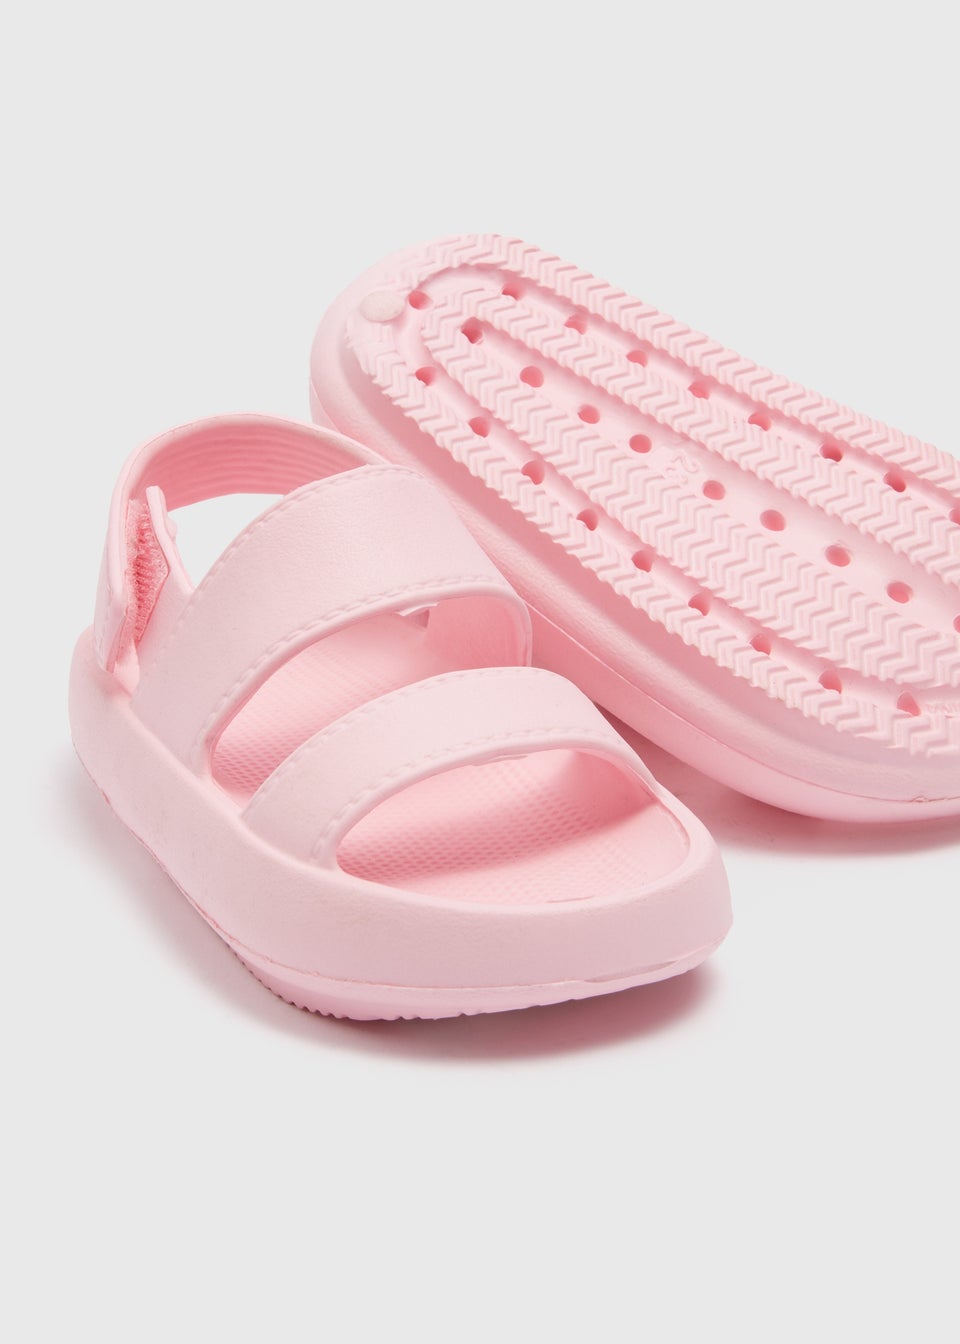 Girls Pink Strap Cloud Sliders (Younger 4-12)